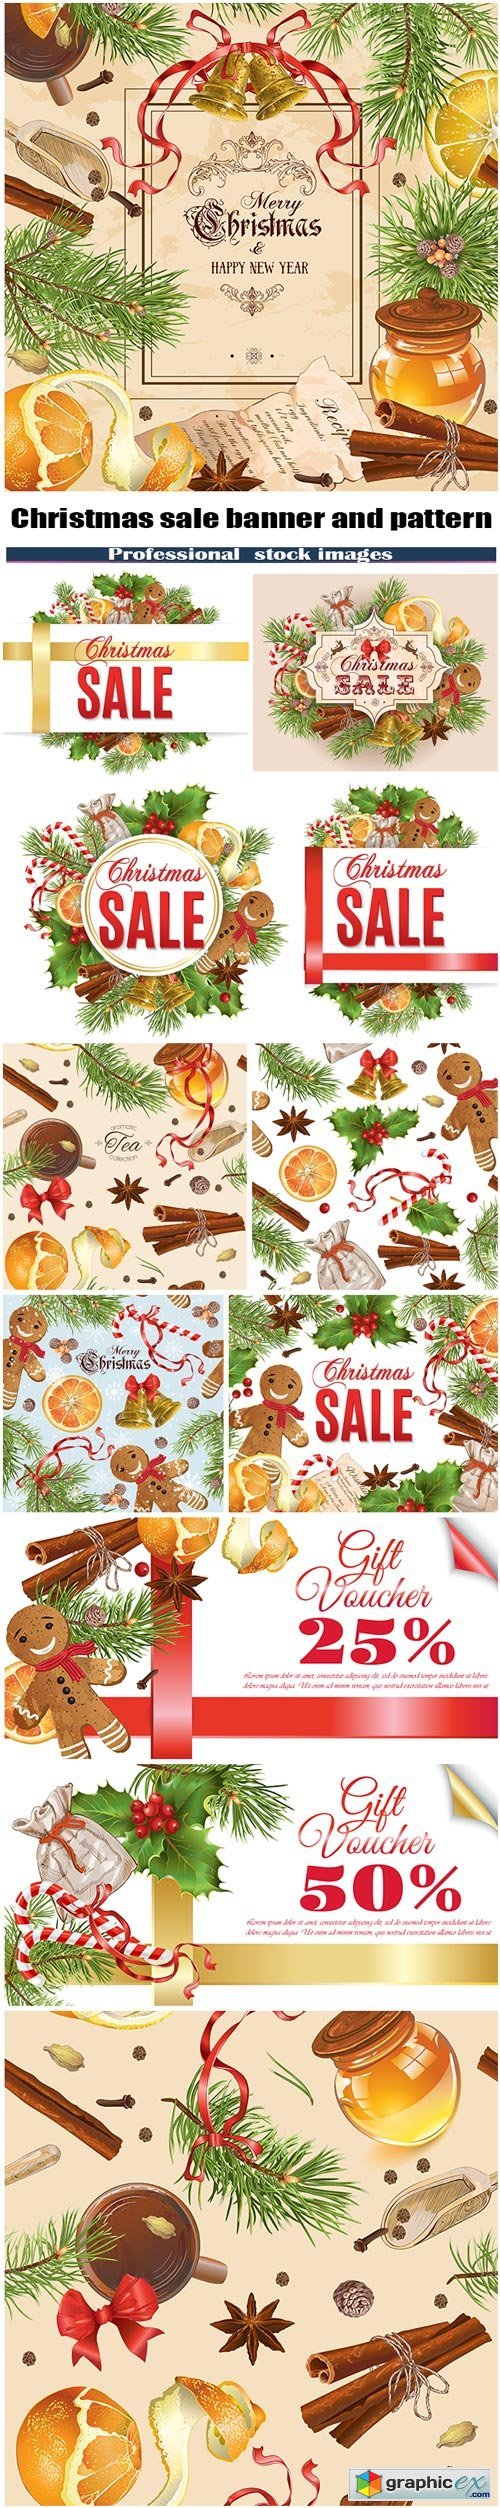 Christmas sale banner and pattern